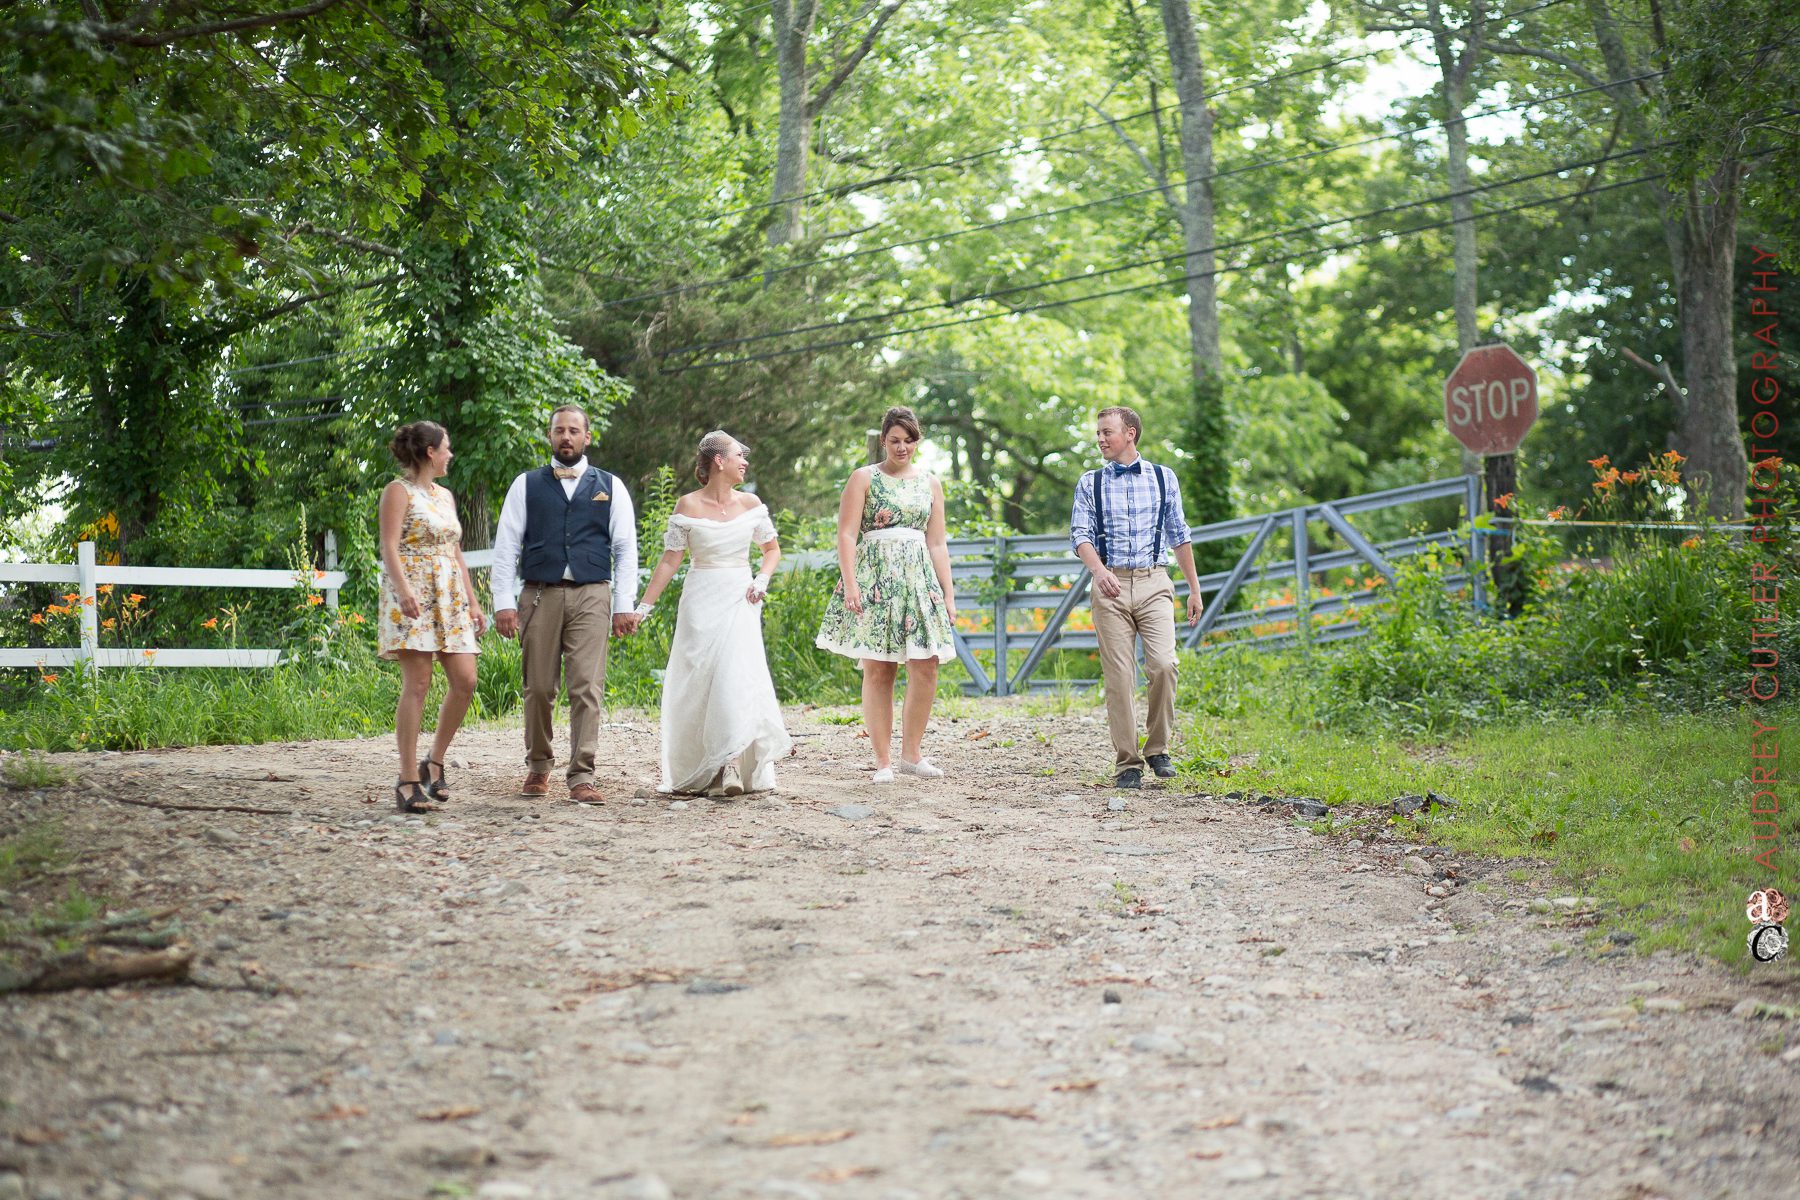 Stepping Stone Ranch Wedding - © Audrey Cutler Photography